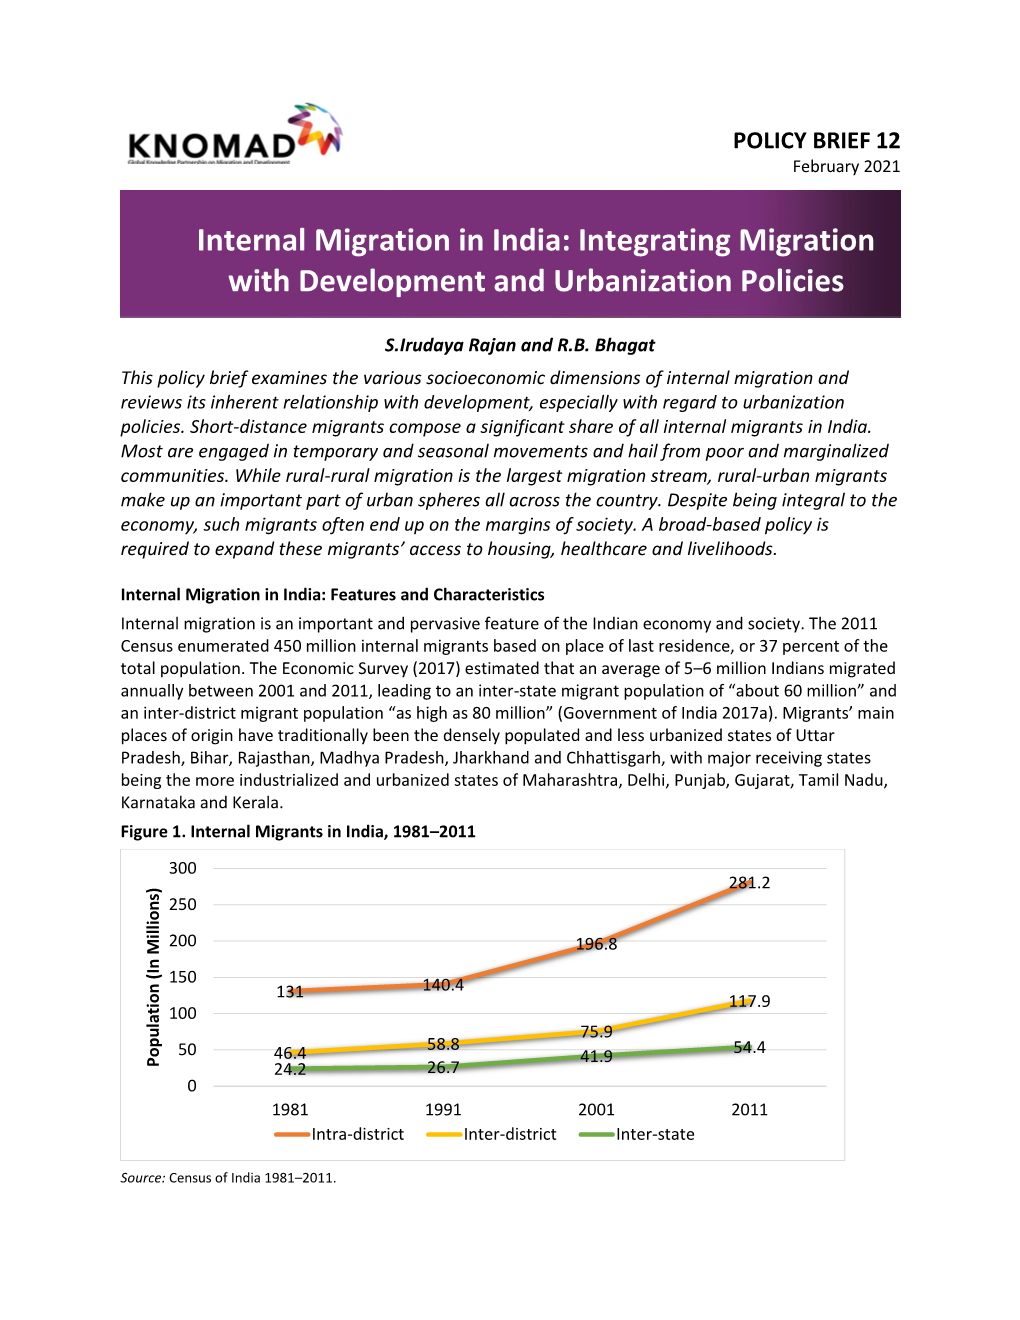 Internal Migration in India: Integrating Migration with Development and Urbanization Policies